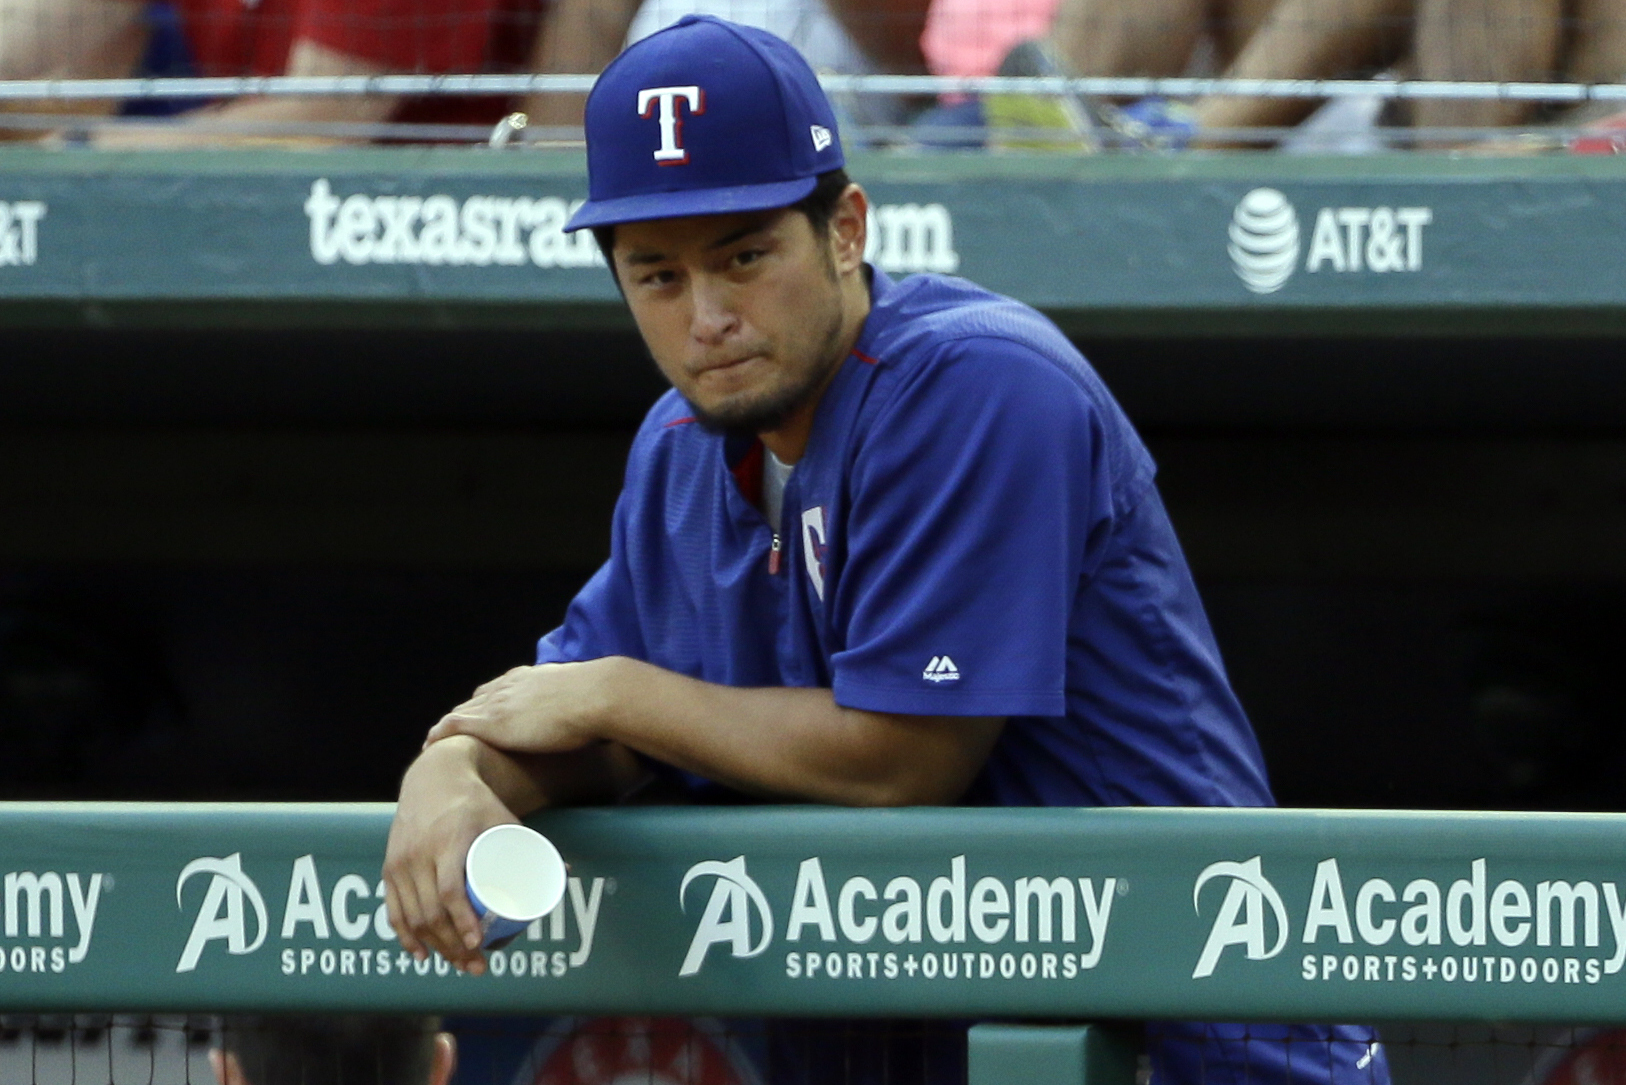 Offseason spent in Texas agrees with Darvish